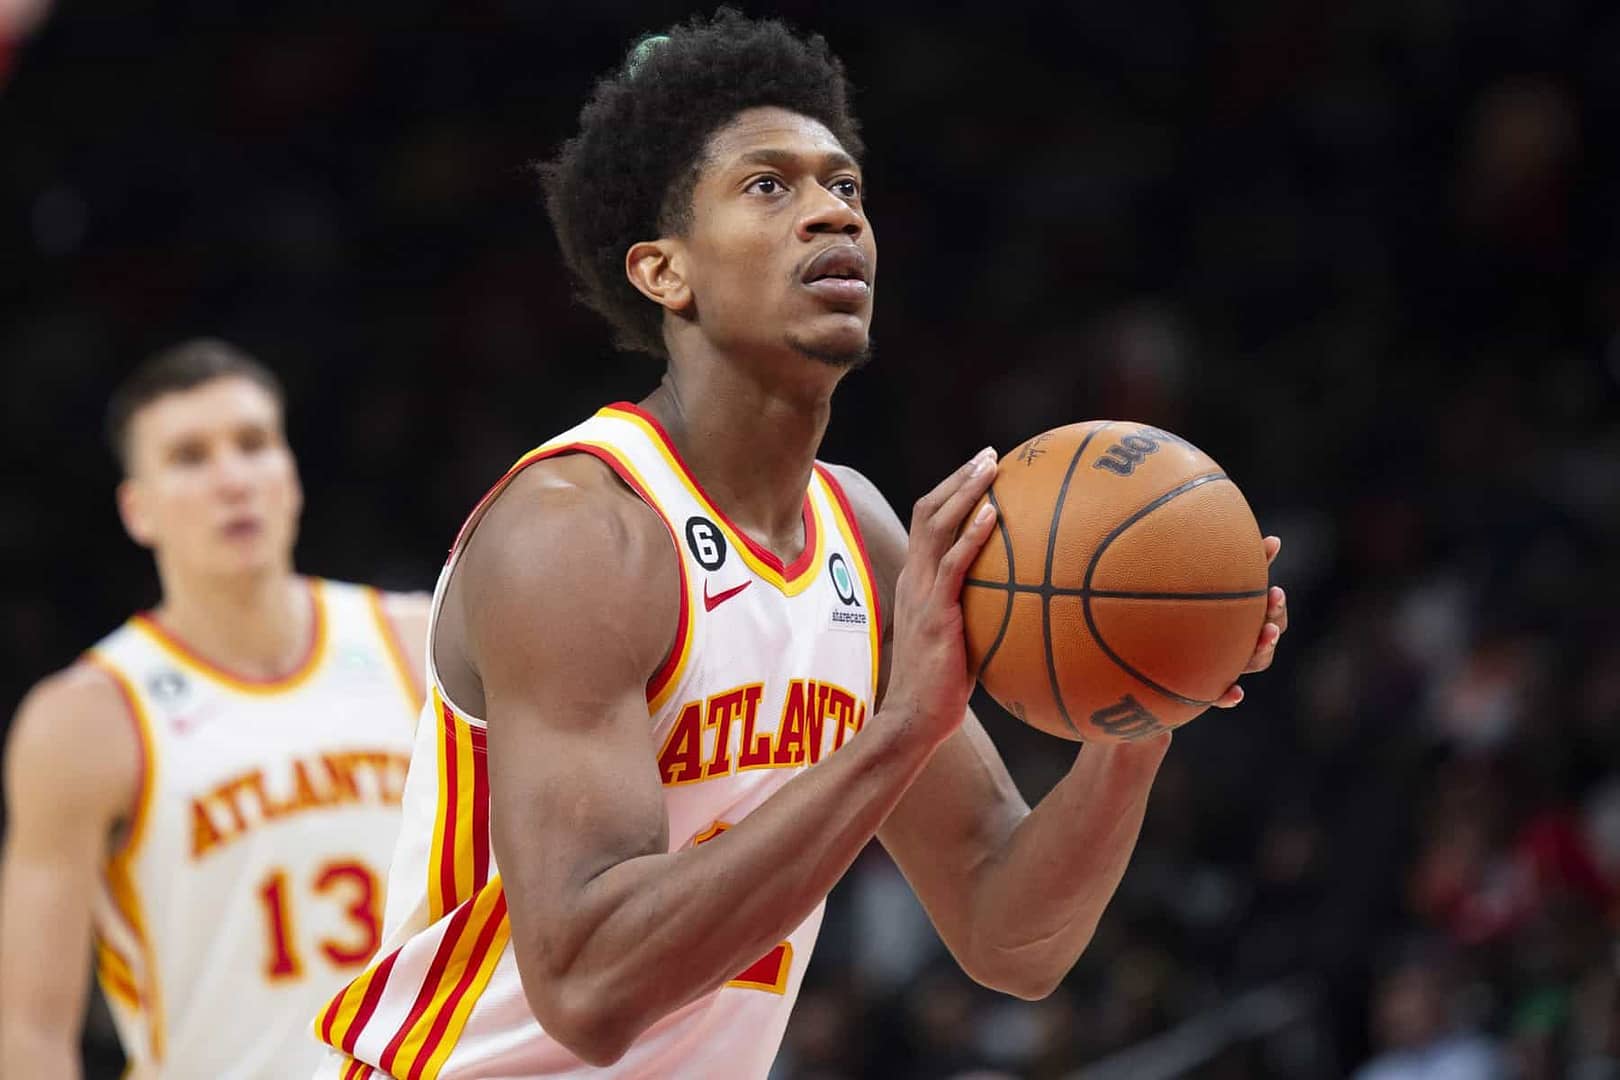 Josh Engleman provides his expert NBA PrizePicks picks and predictions today, including a look at Deandre Ayton and De'Andre Hunter.